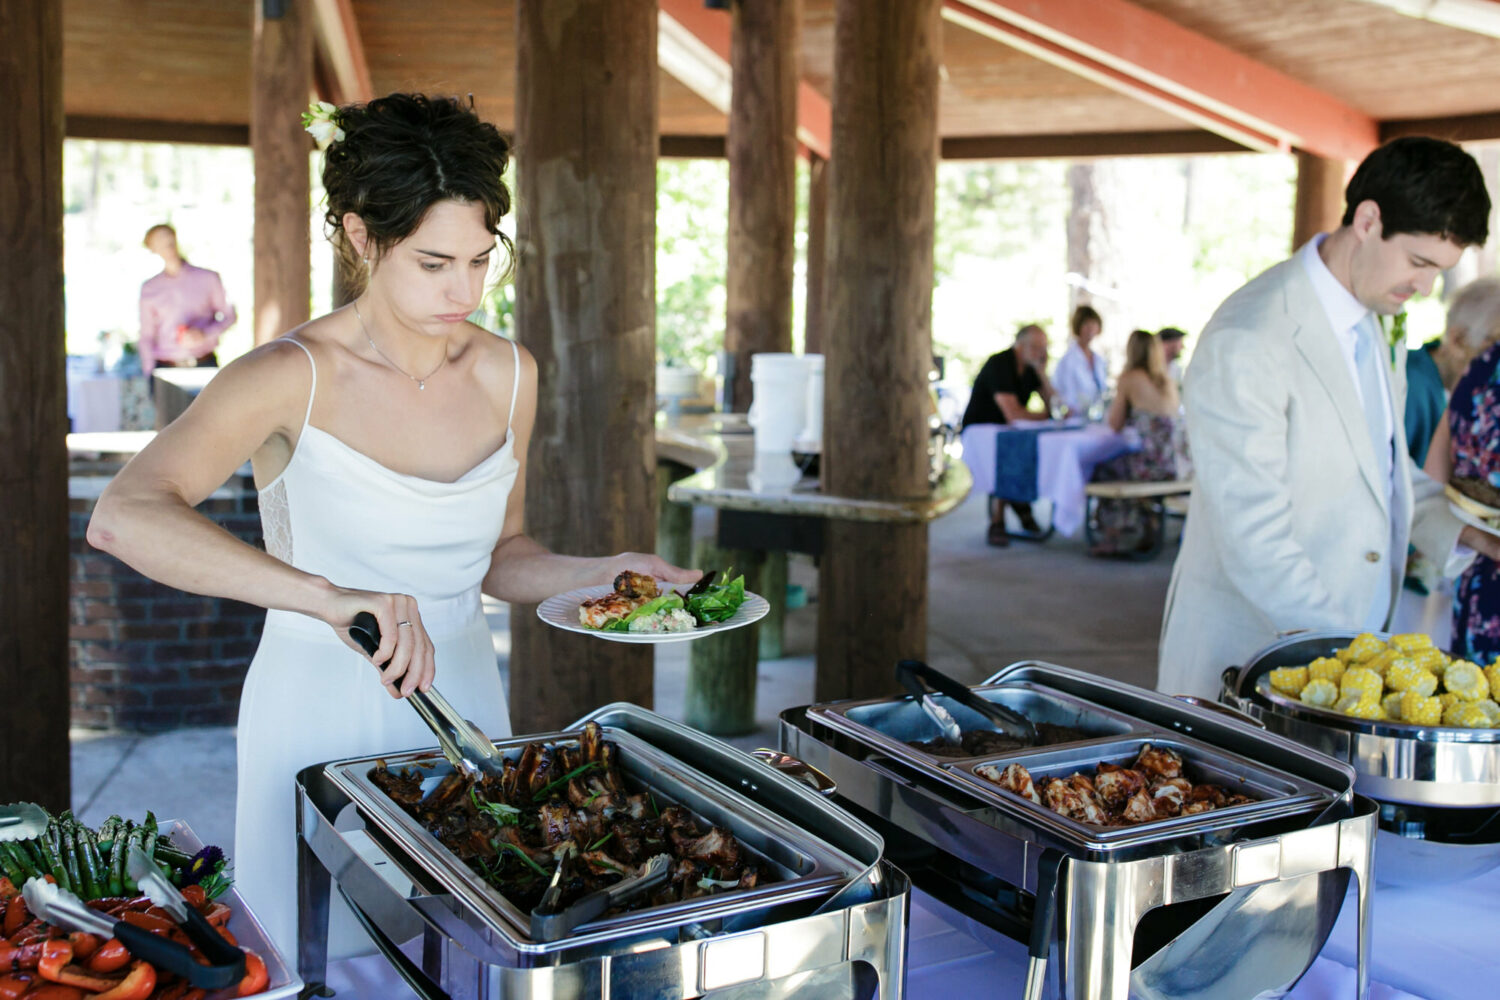 A bride expresses a moment of overwhelm as she helps herself to a Lake Tahoe catering company creation.